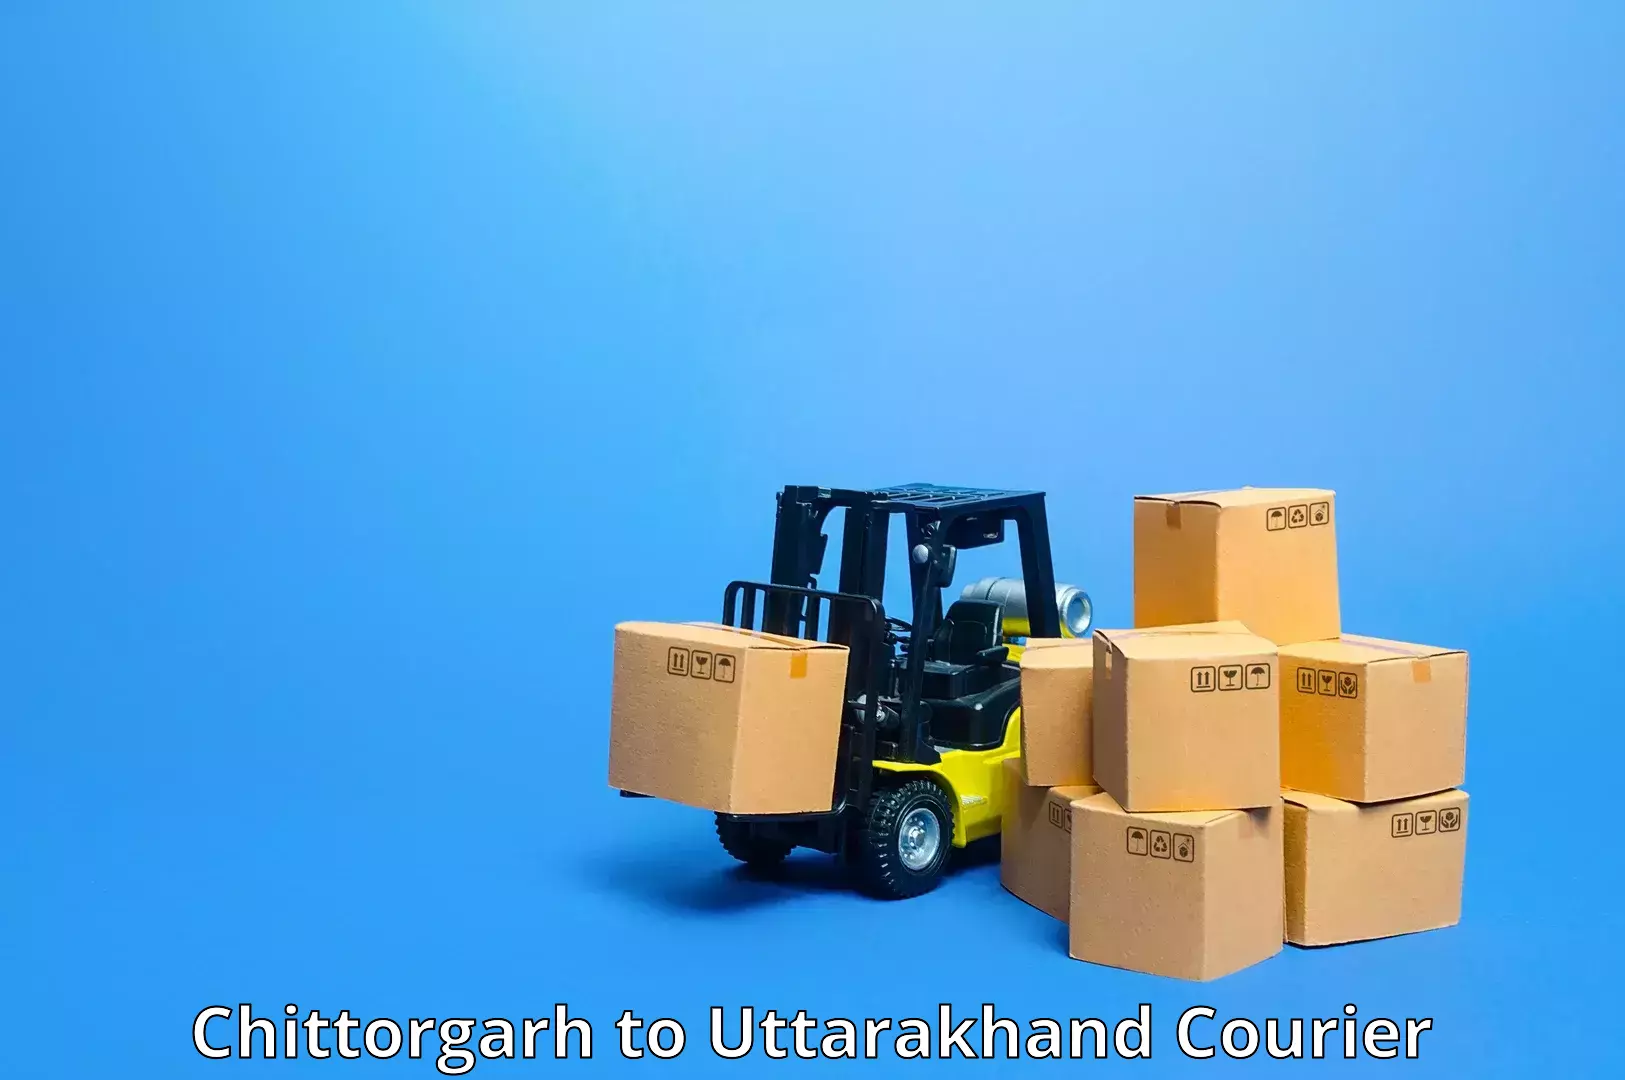 Global courier networks Chittorgarh to Almora